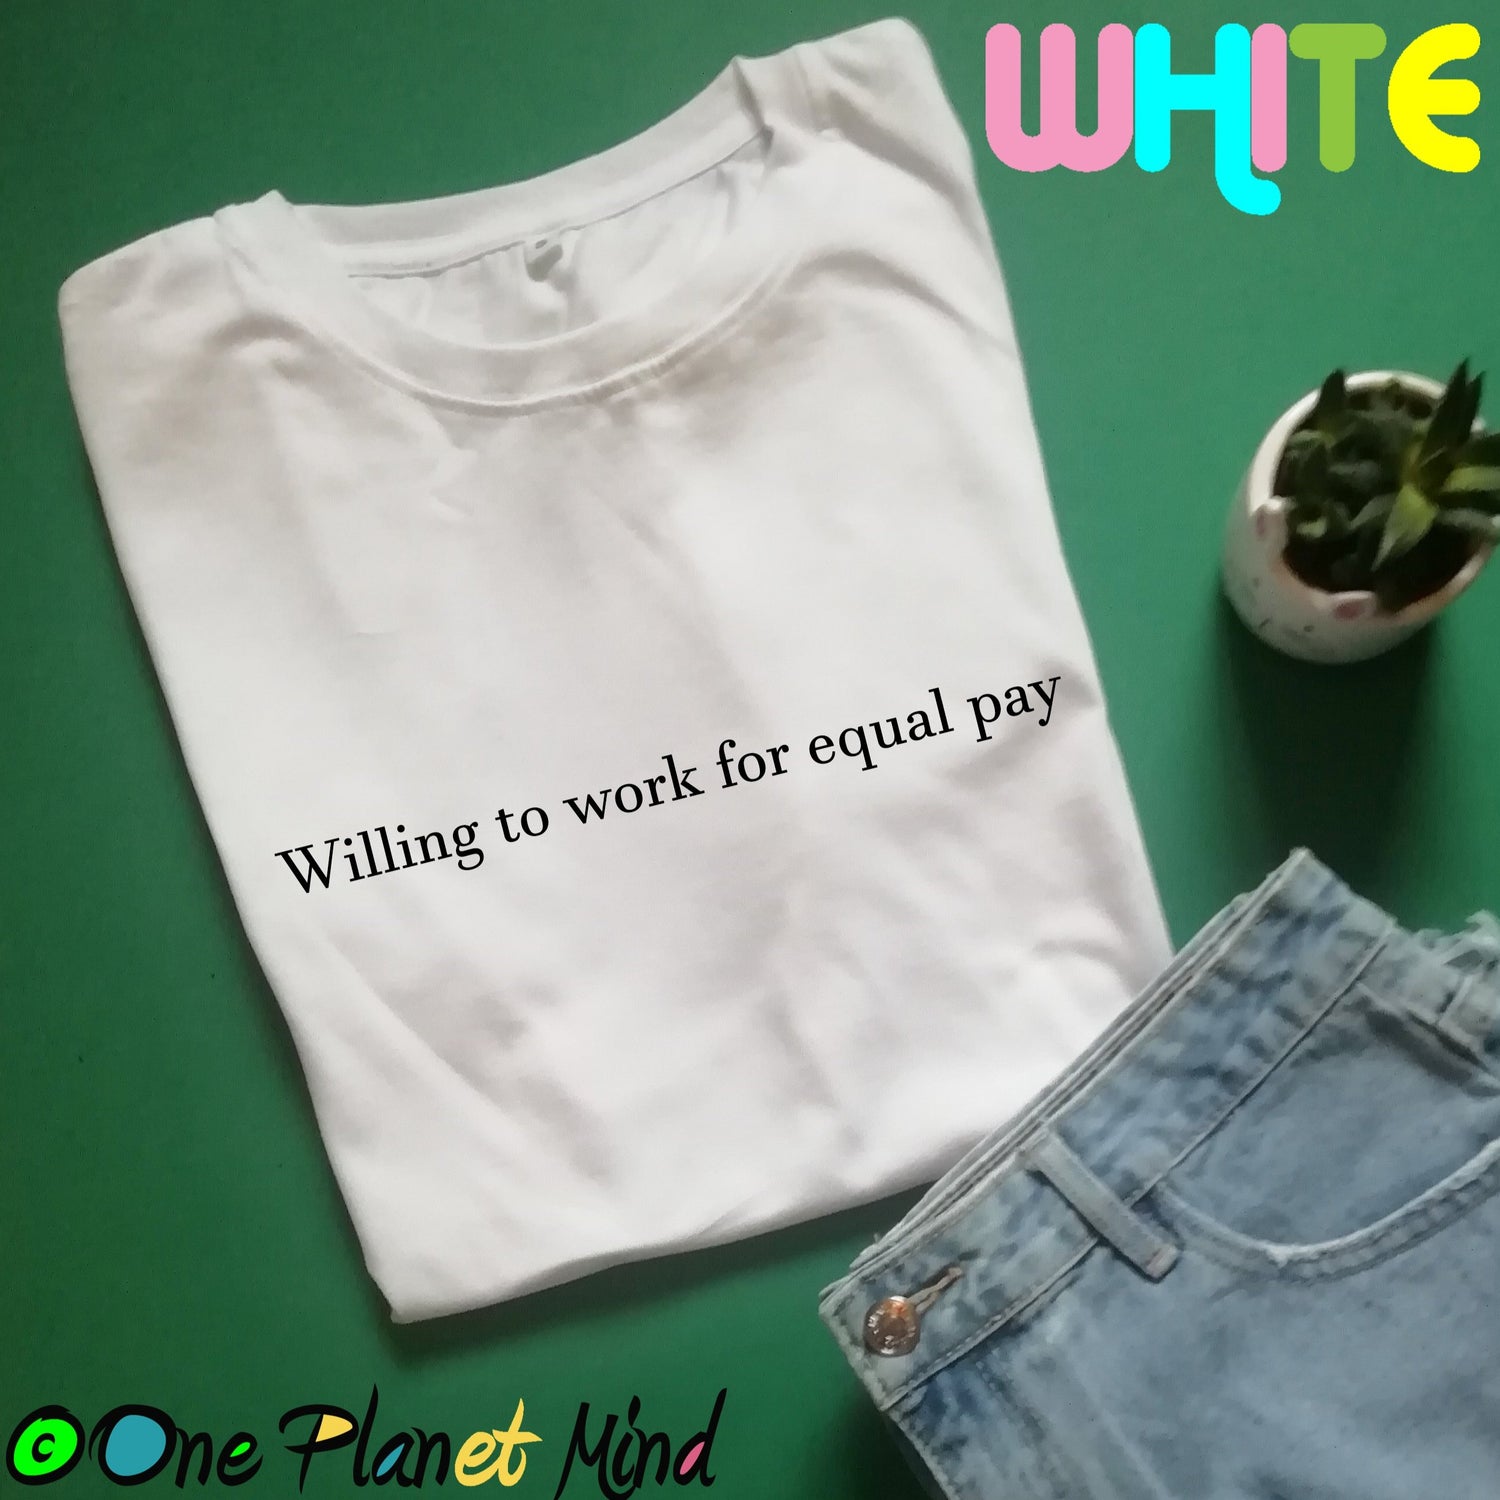 Will work for equal pay feminist slogan Organic Shirt